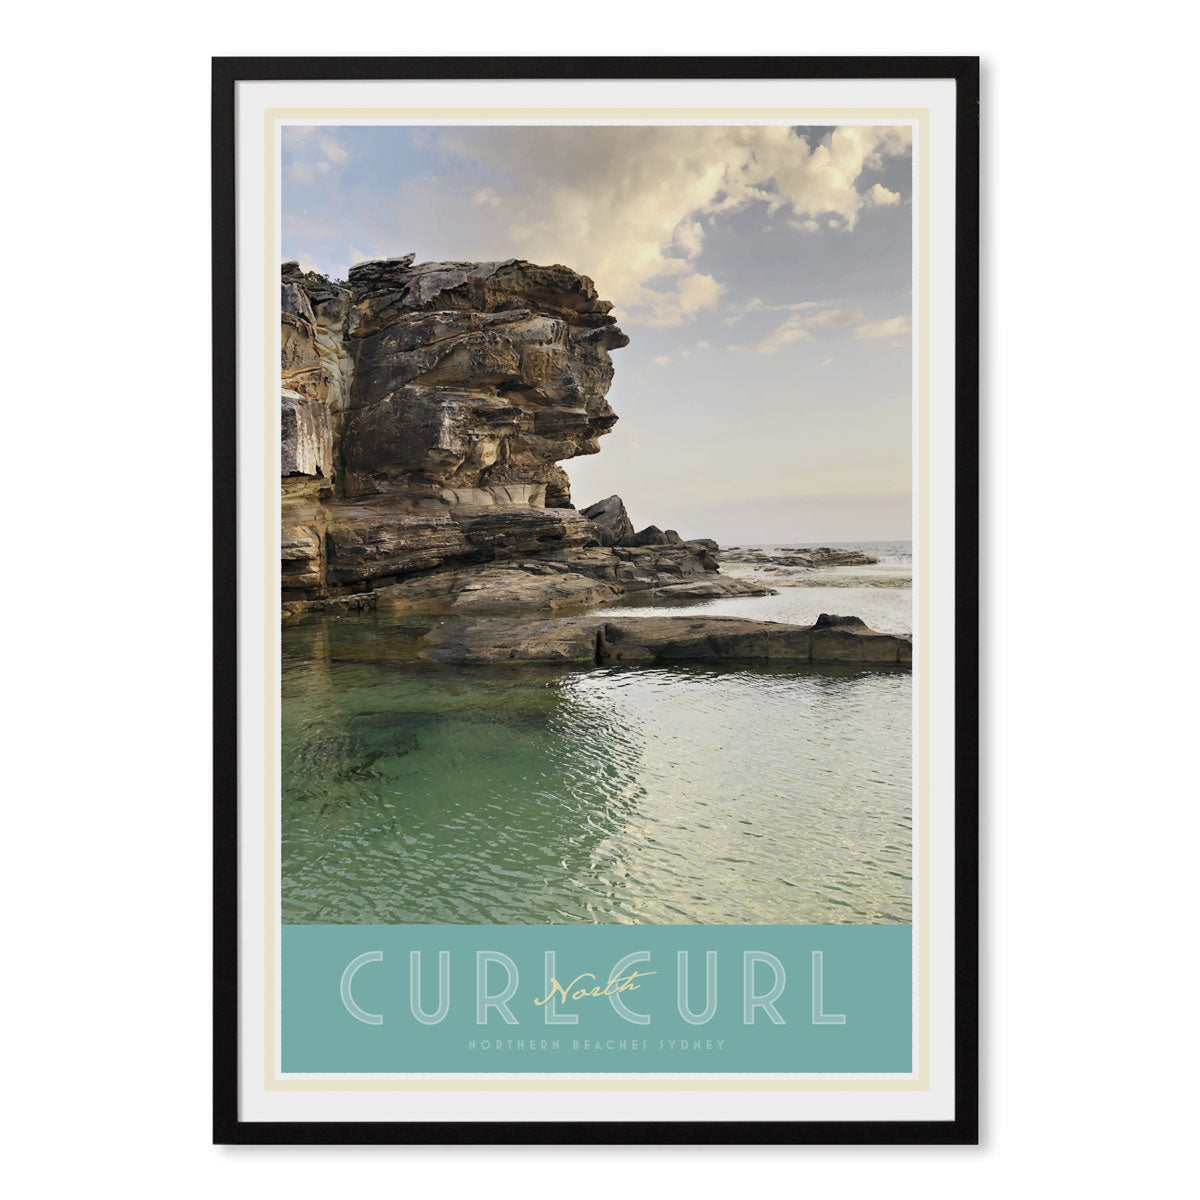 North Curl Curl Pool vintage travel style black framed poster by places we luv